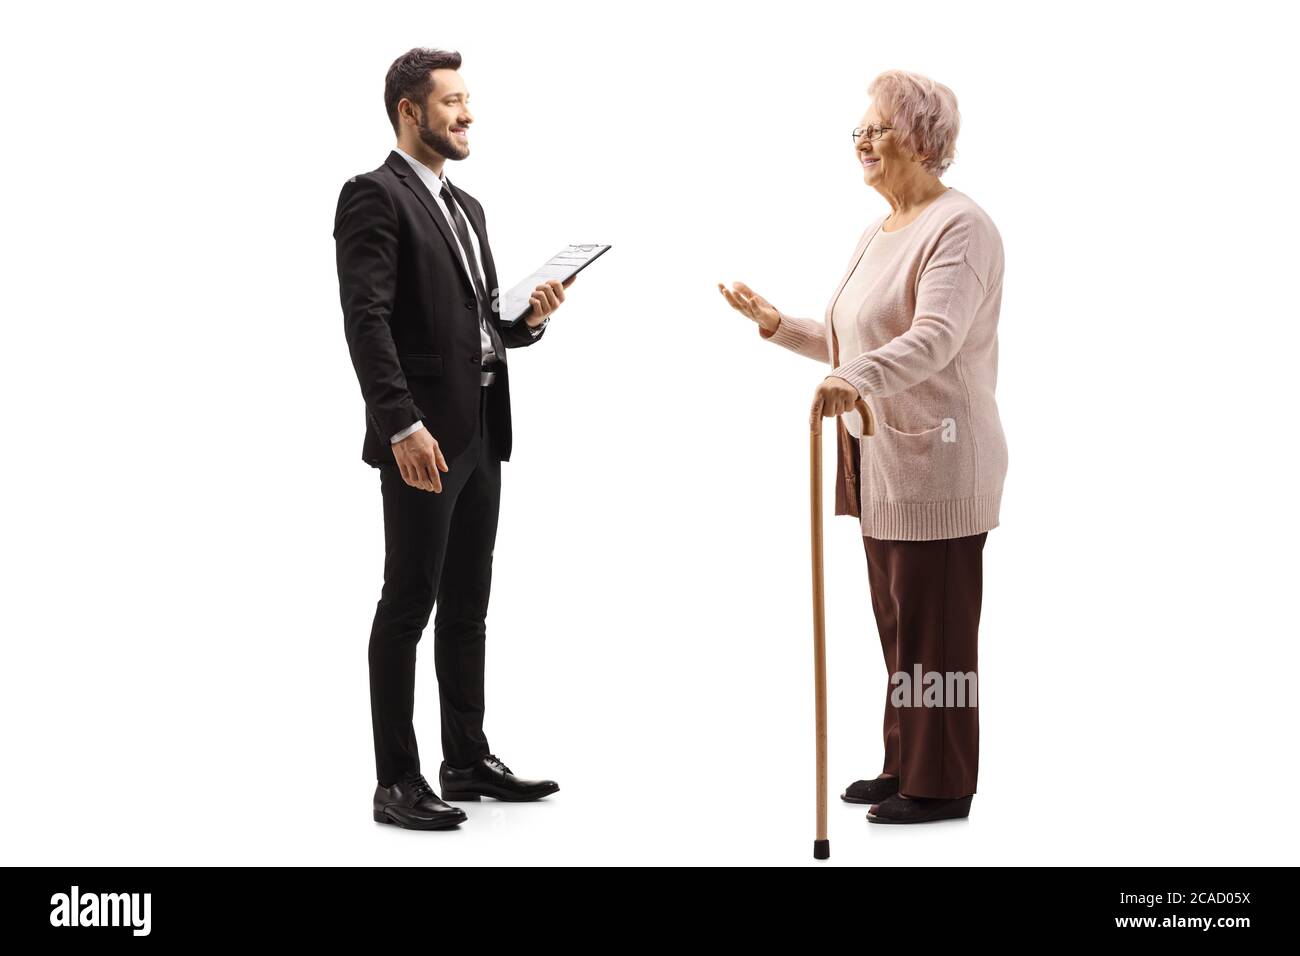 Full length profile shot of an elderly woman talking to a young elegant man in a suit isolated on white background Stock Photo